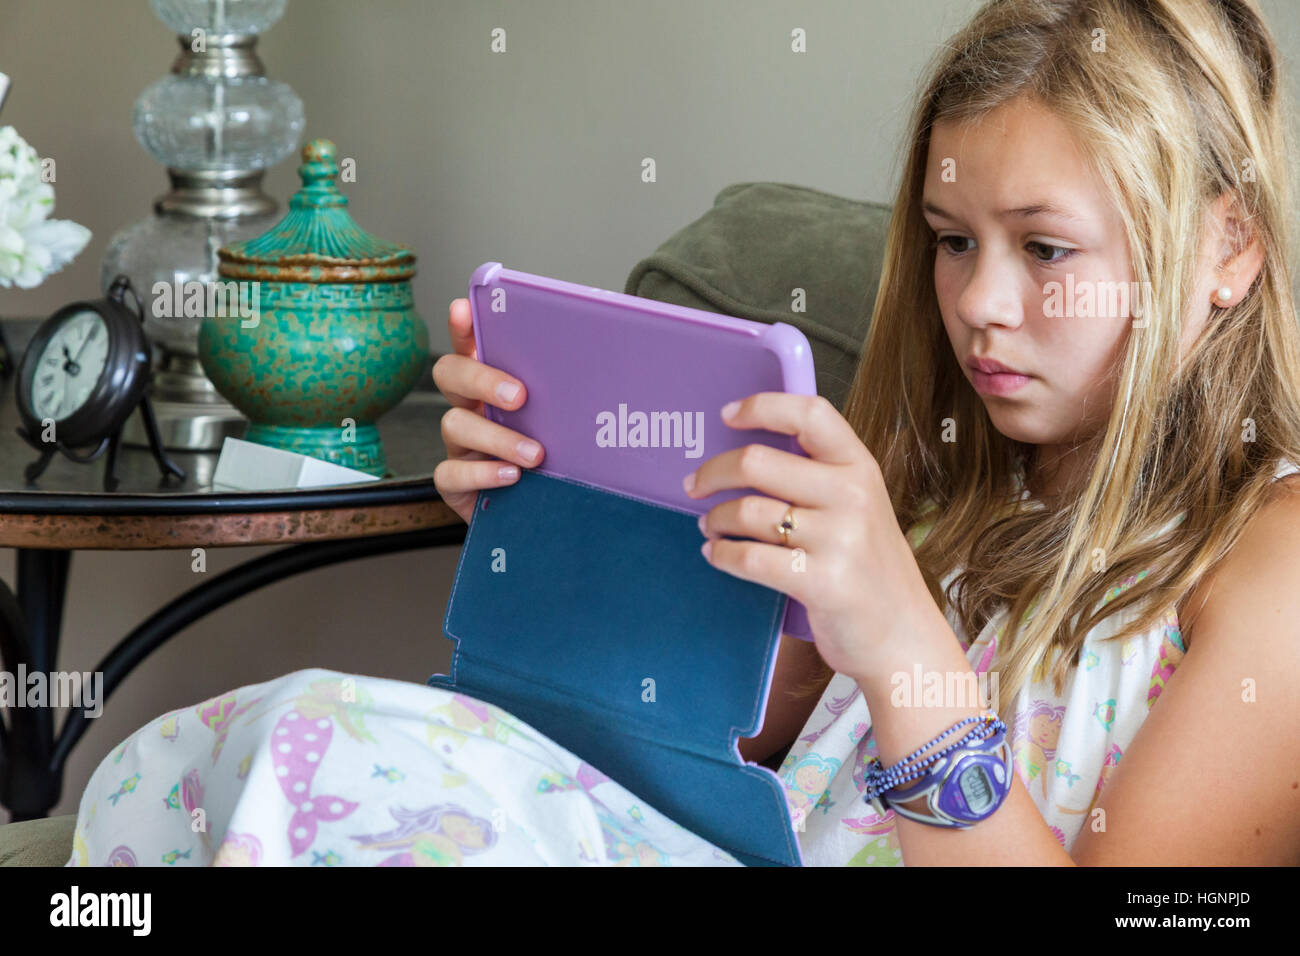 Eleven-year-old Girl Playing a game on iPad. Stock Photo